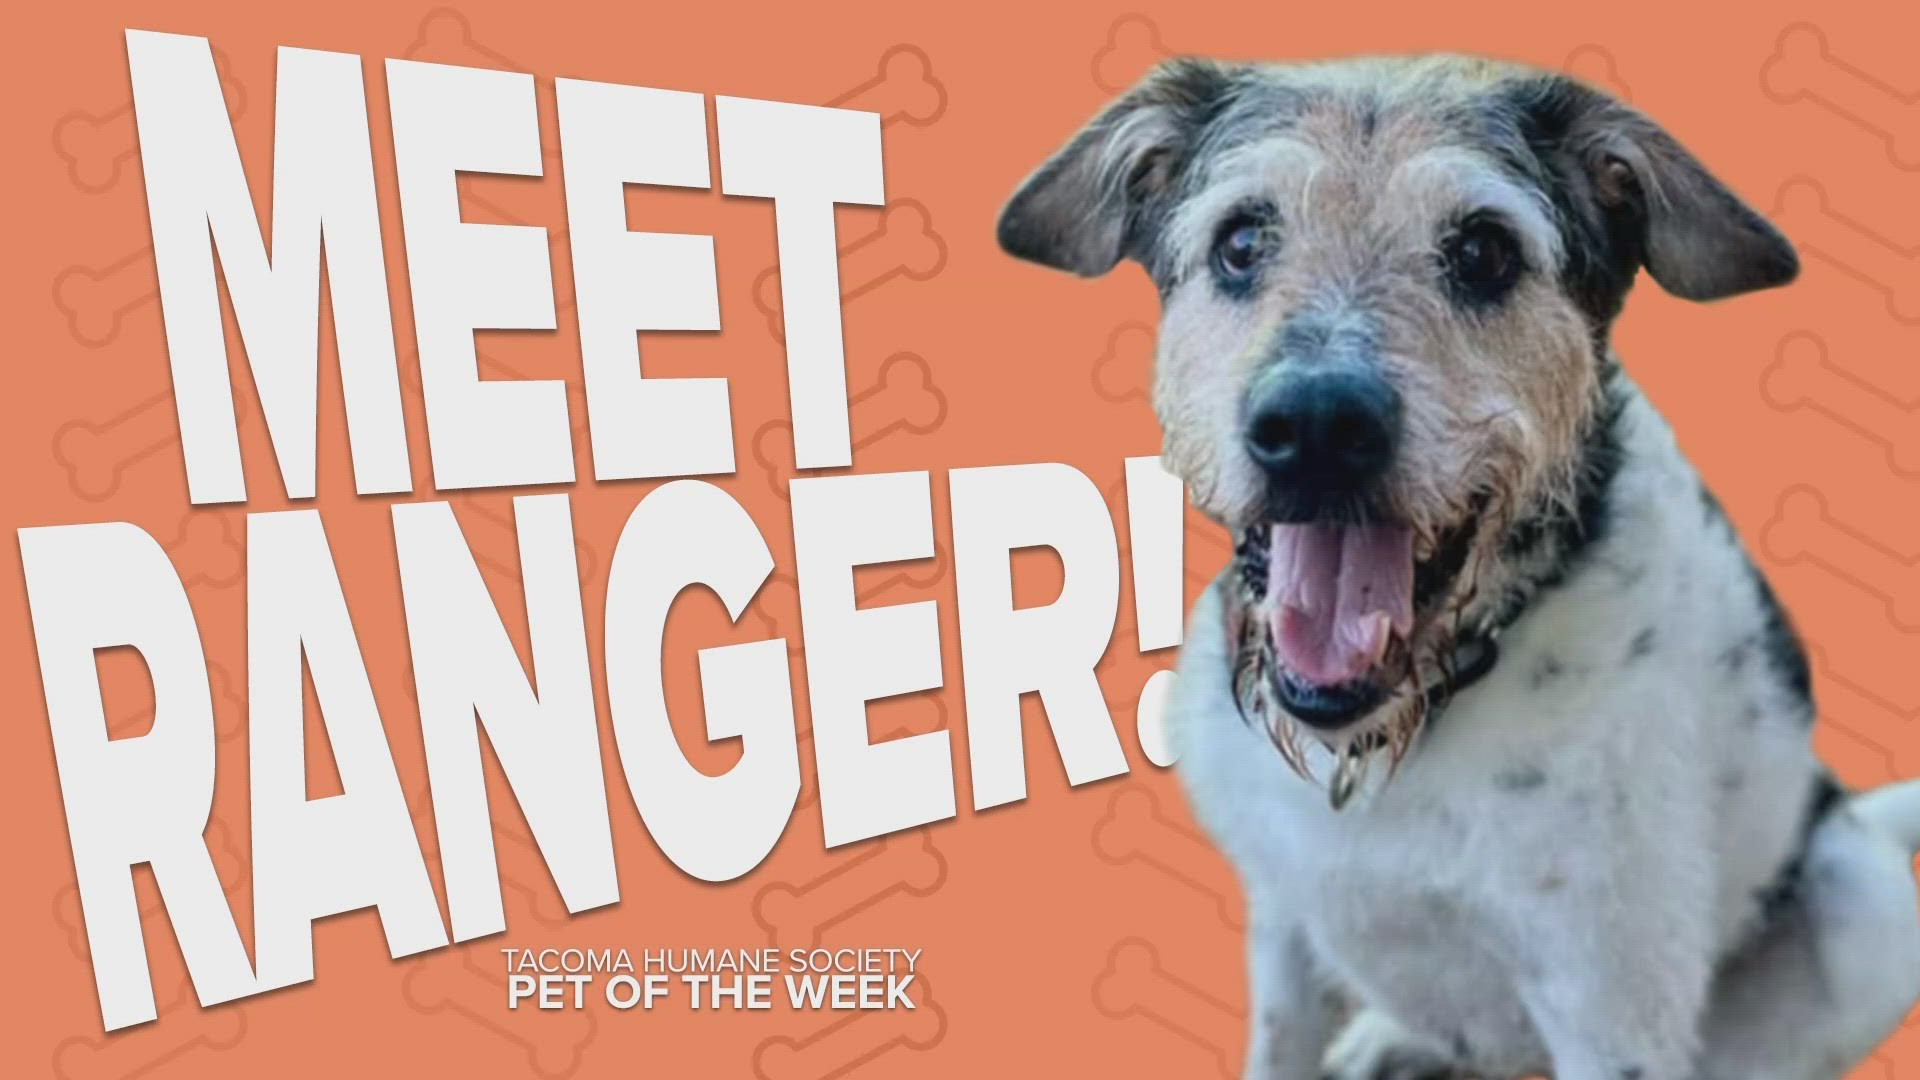 This week's featured adoptable pet is Ranger!